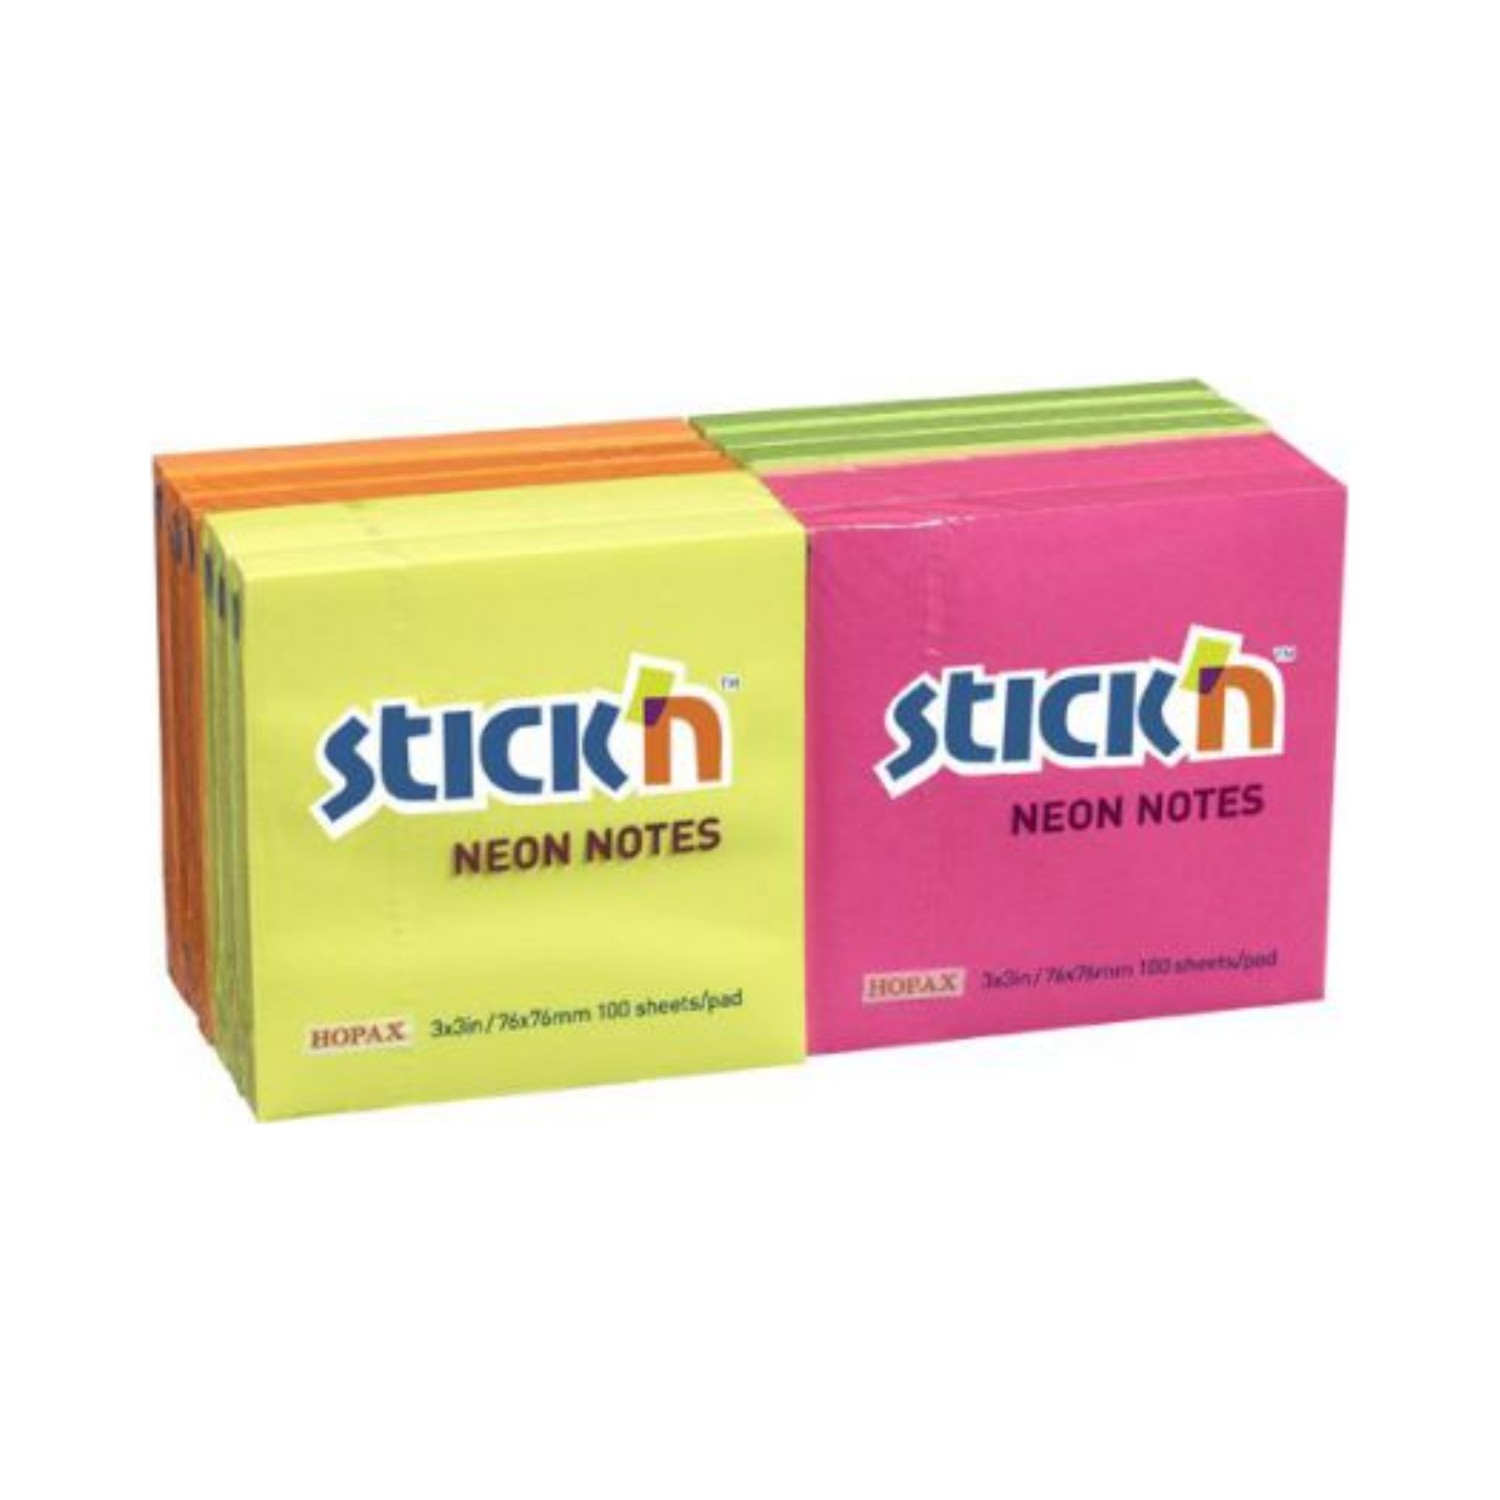 Stick+%27n+Neon+Notes+76+x+76mm+Assorted